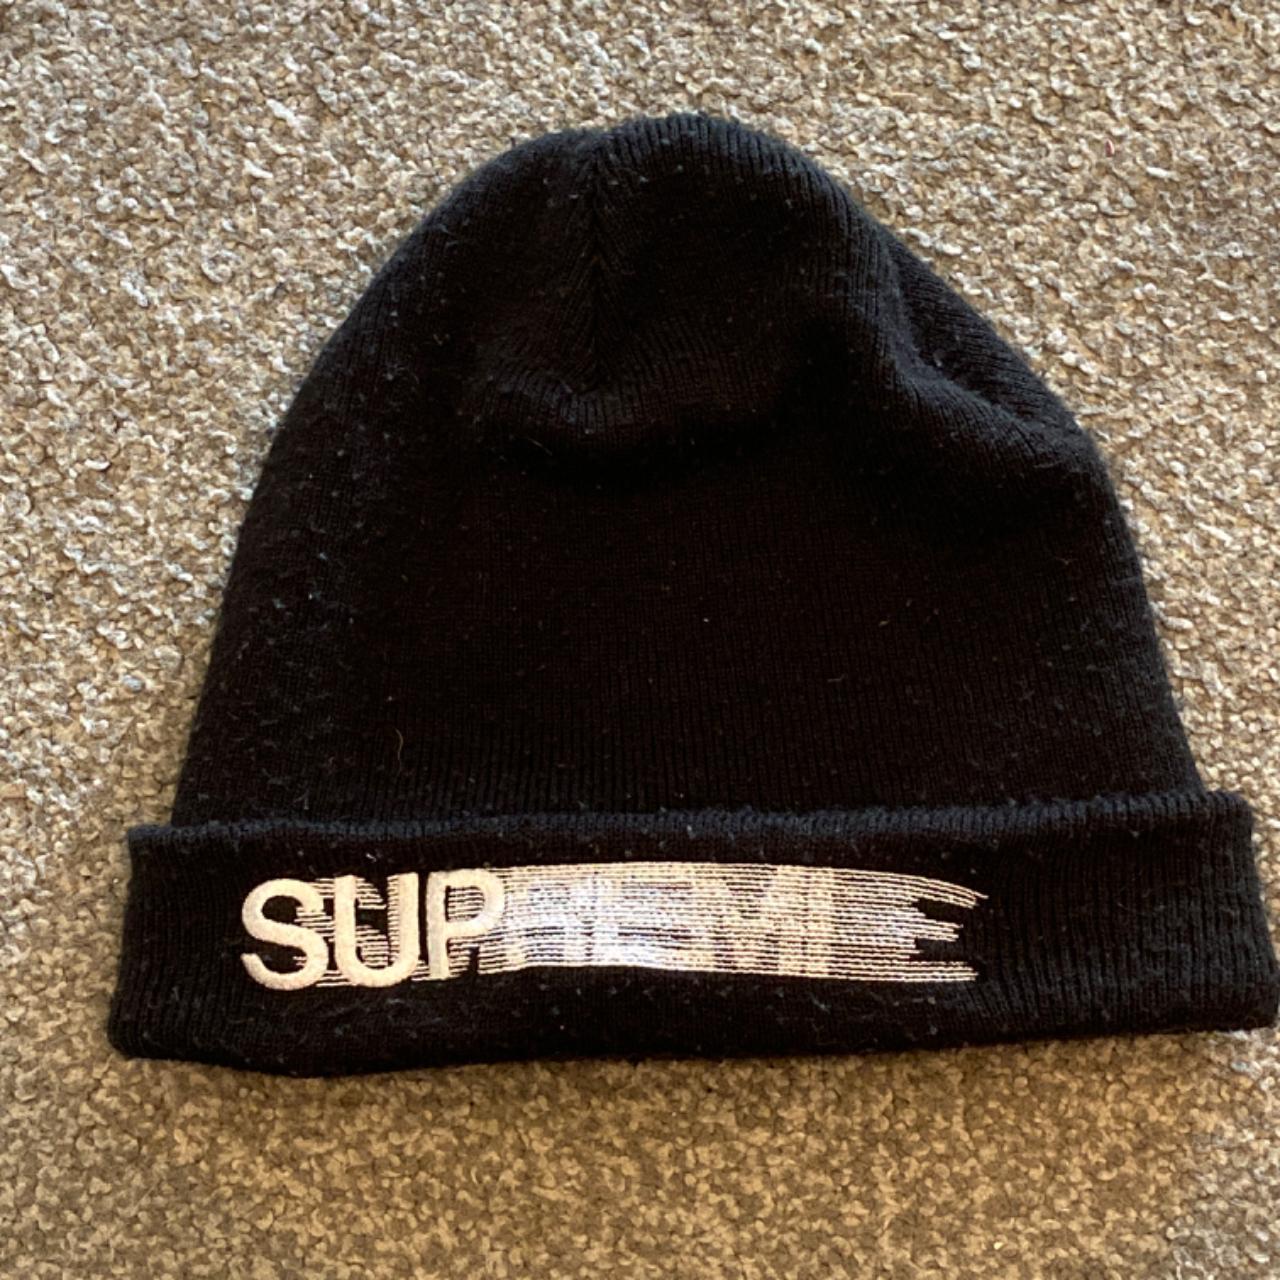 Supreme holographic logo beanie hat. Looks red on - Depop